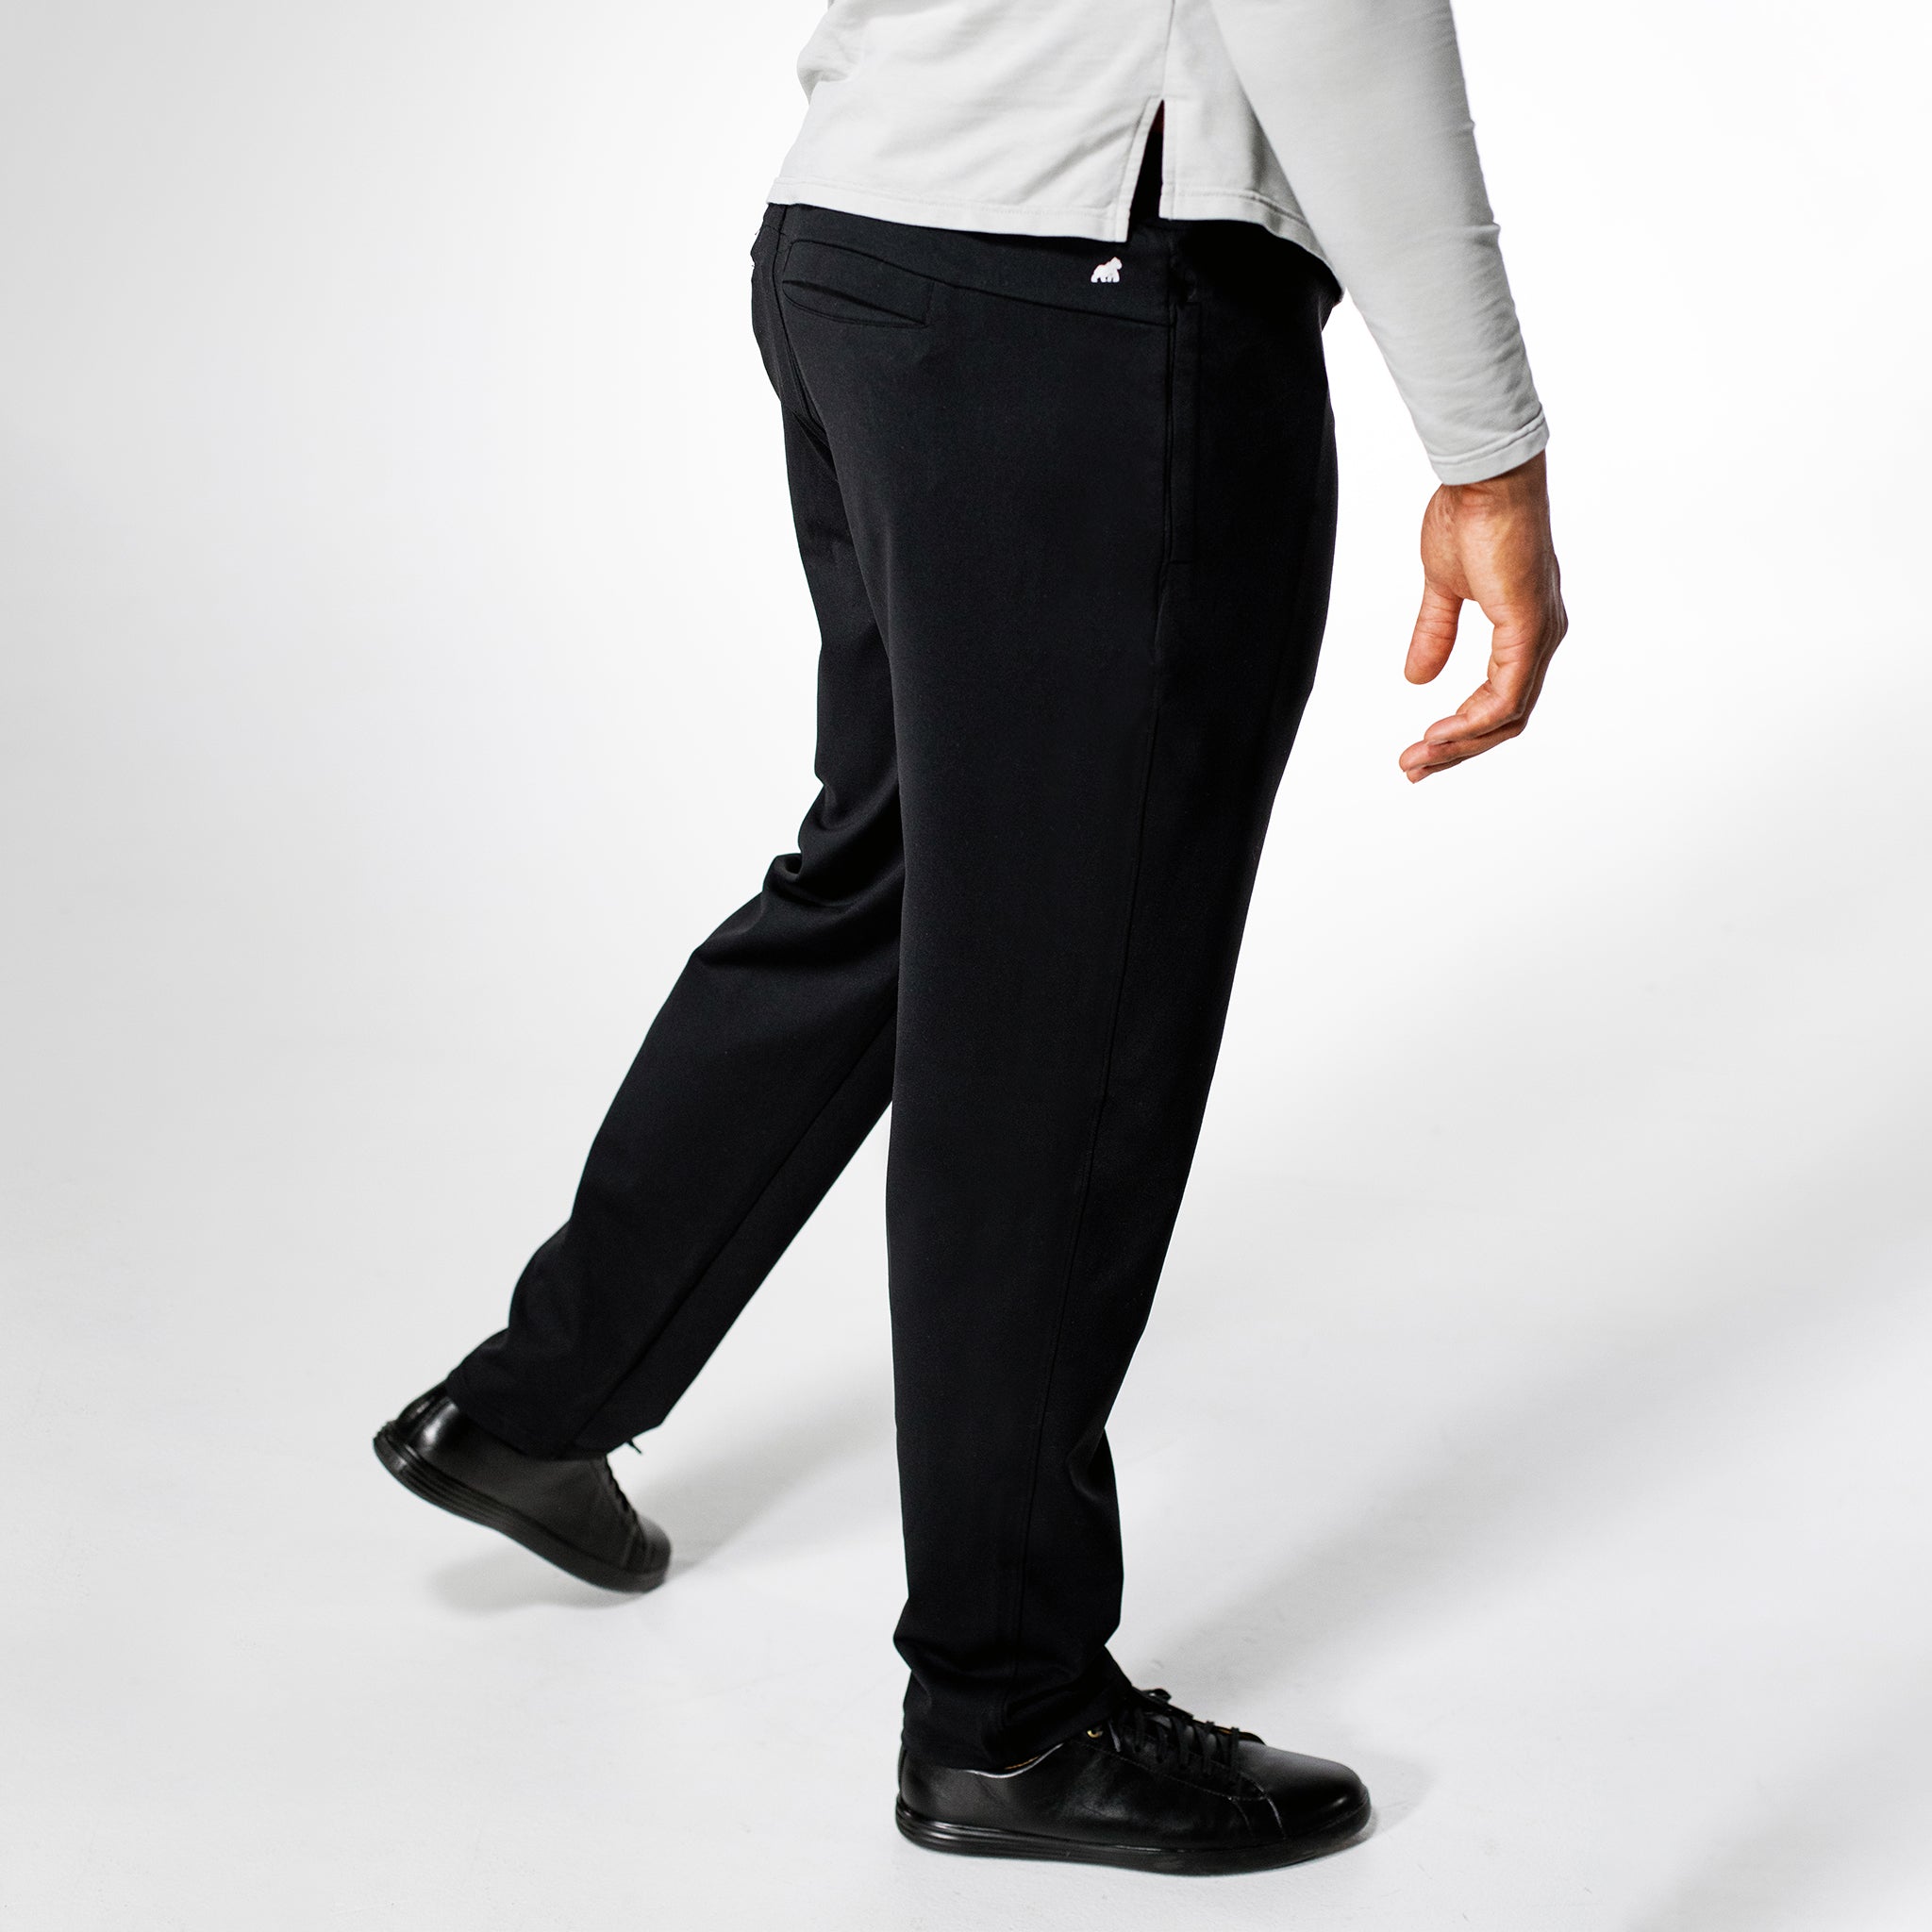 Solid Black Work-to-Workout Pants